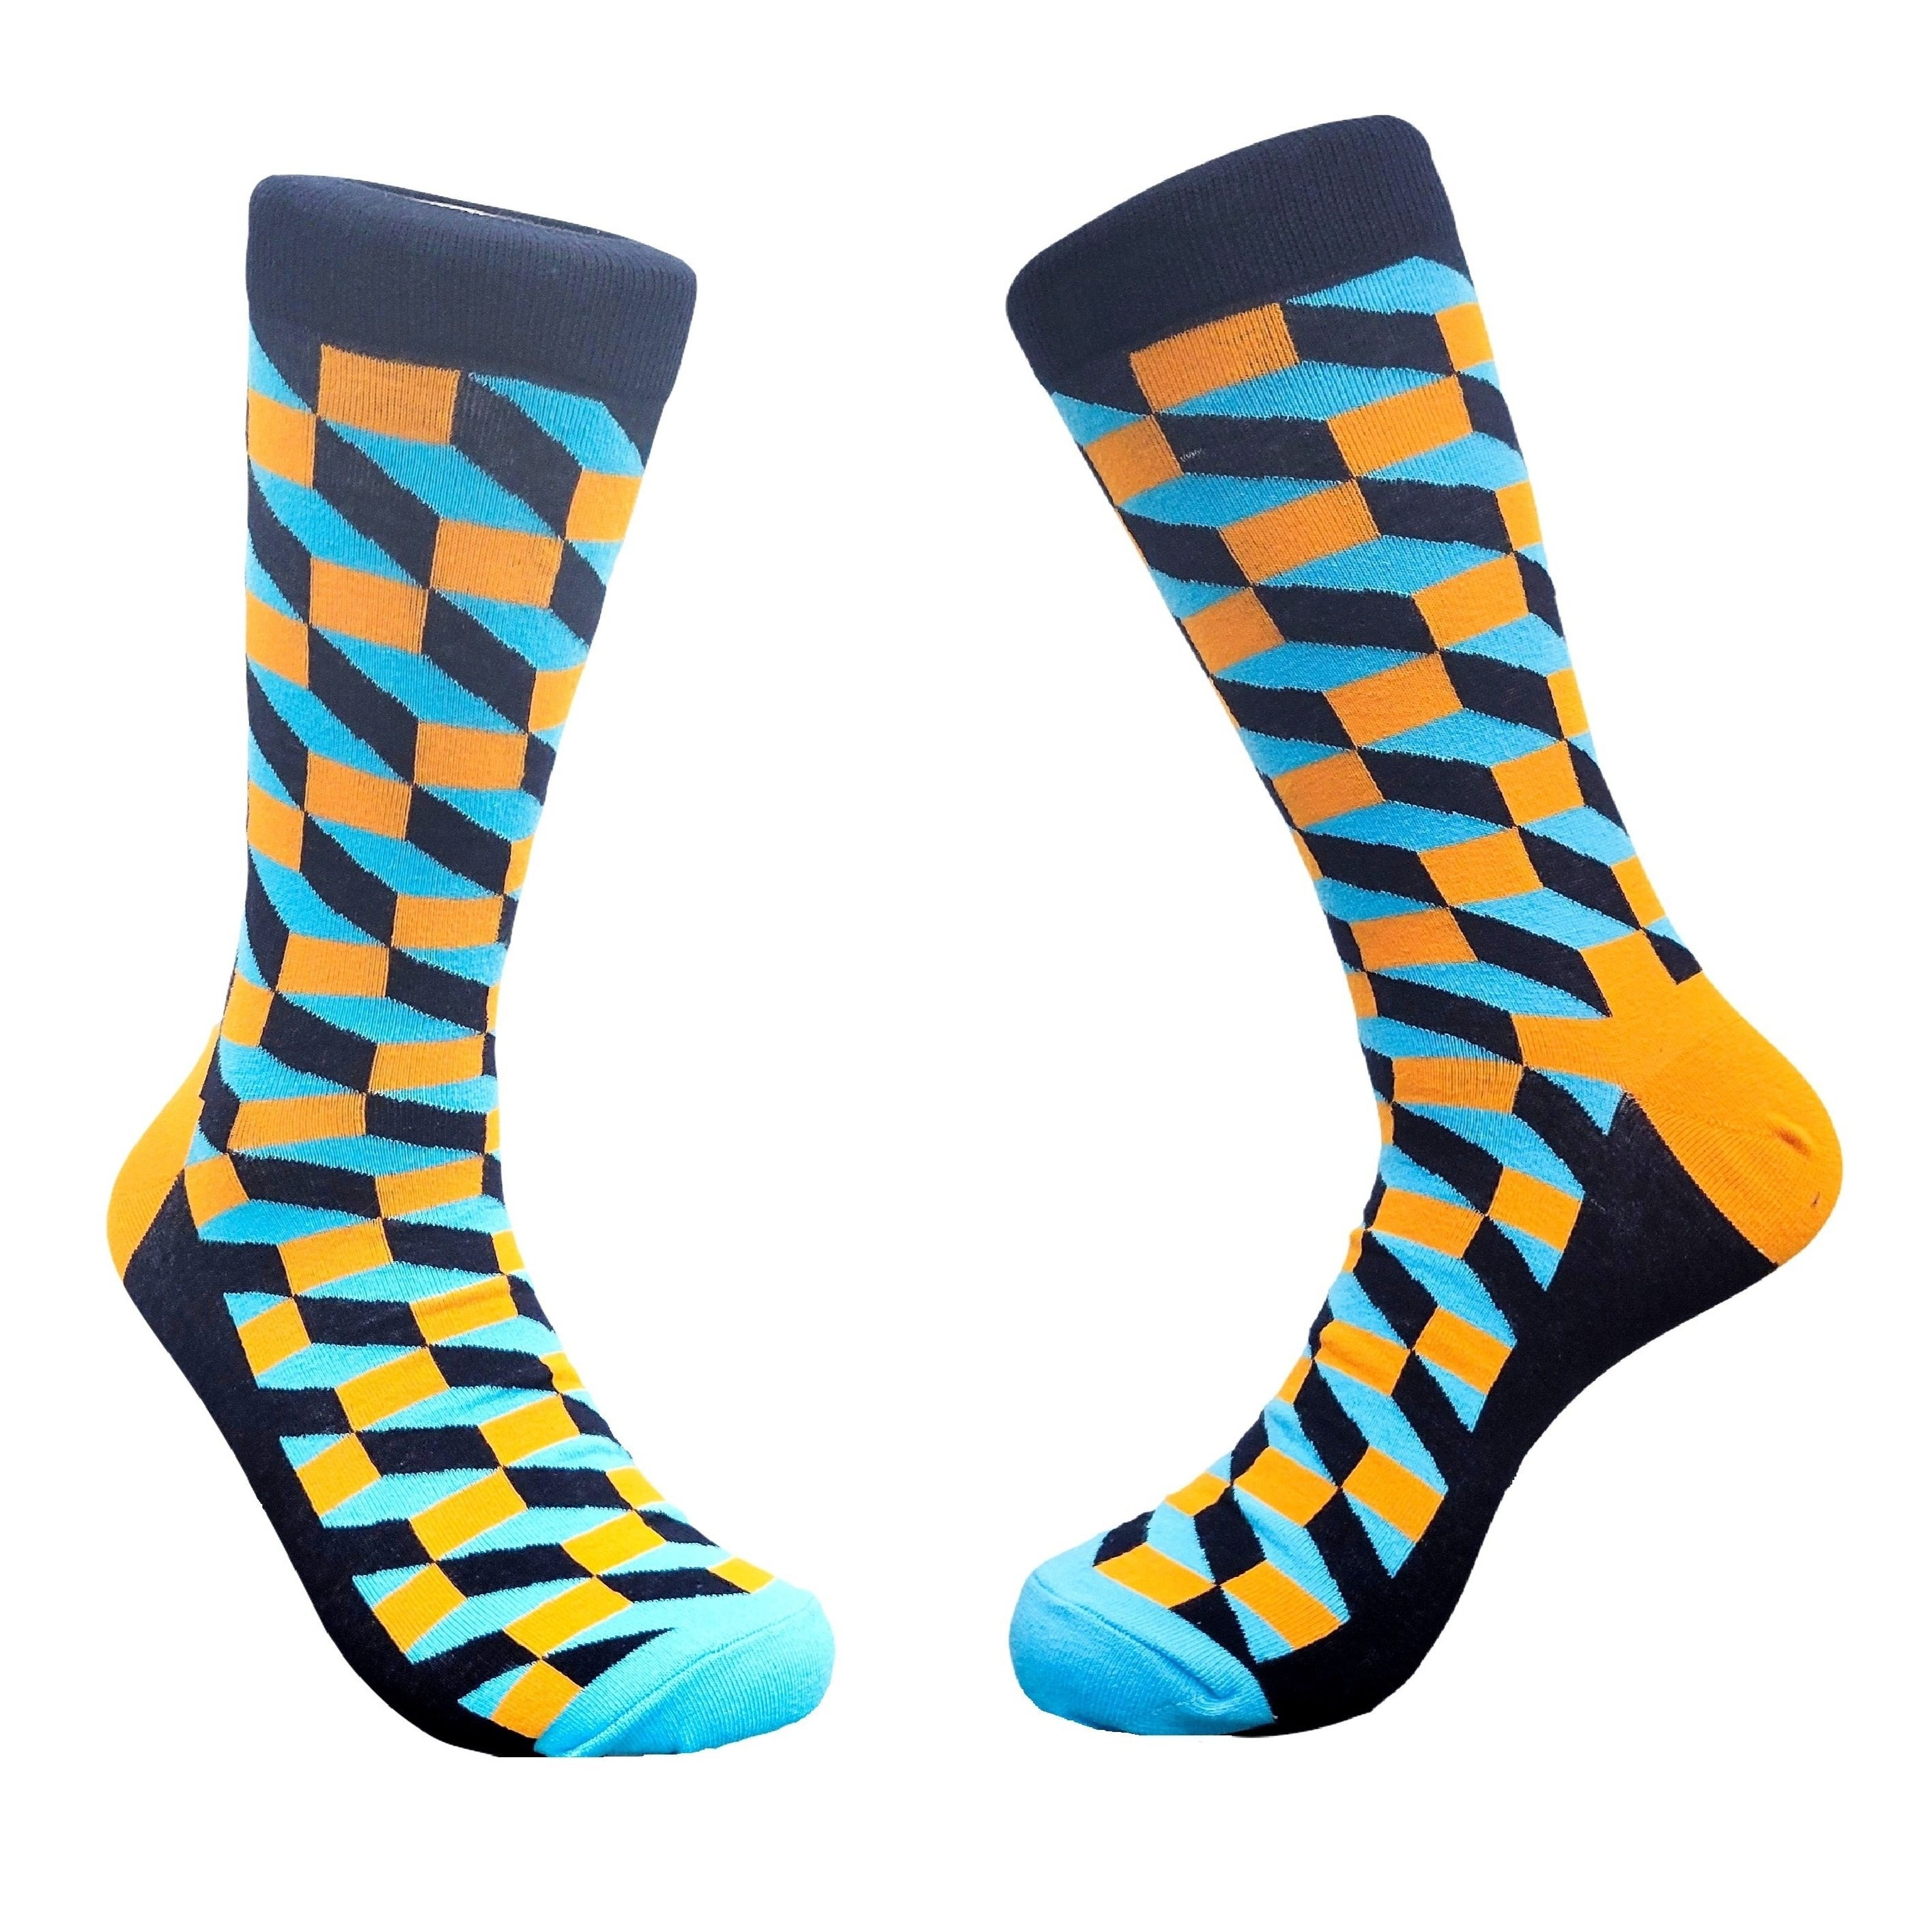 Three Dimensional (3D) Patterned Socks from the Sock Panda (Adult Large)